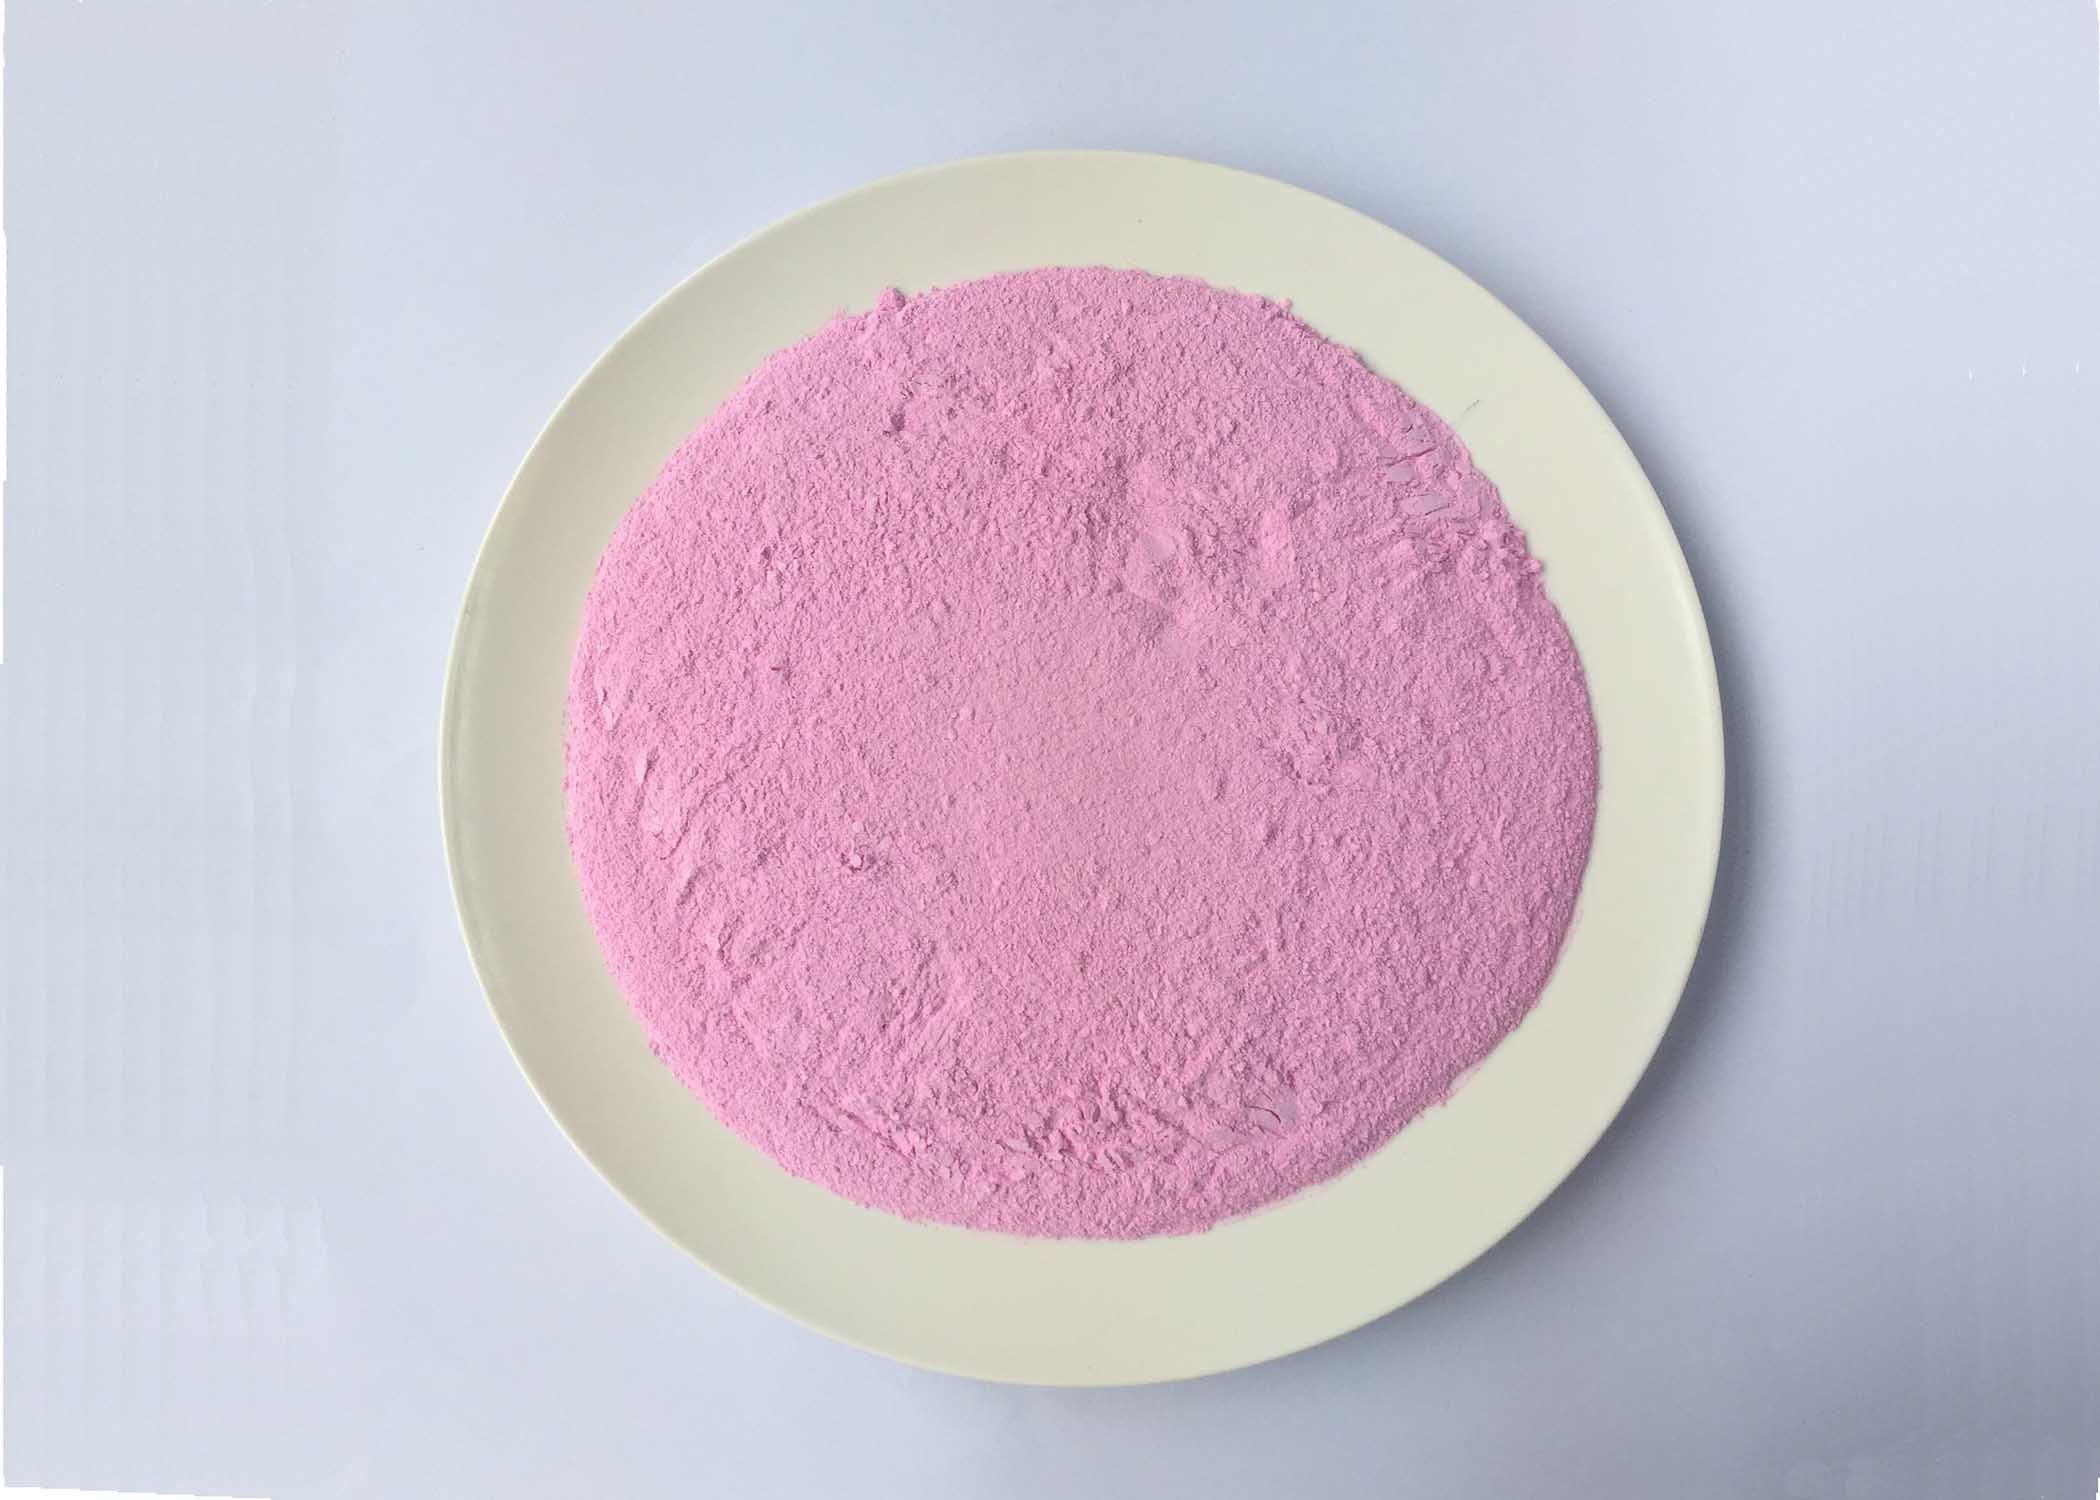 Pink Urea Formaldehyde Resin Powder Compound With Addition Of Lubricant